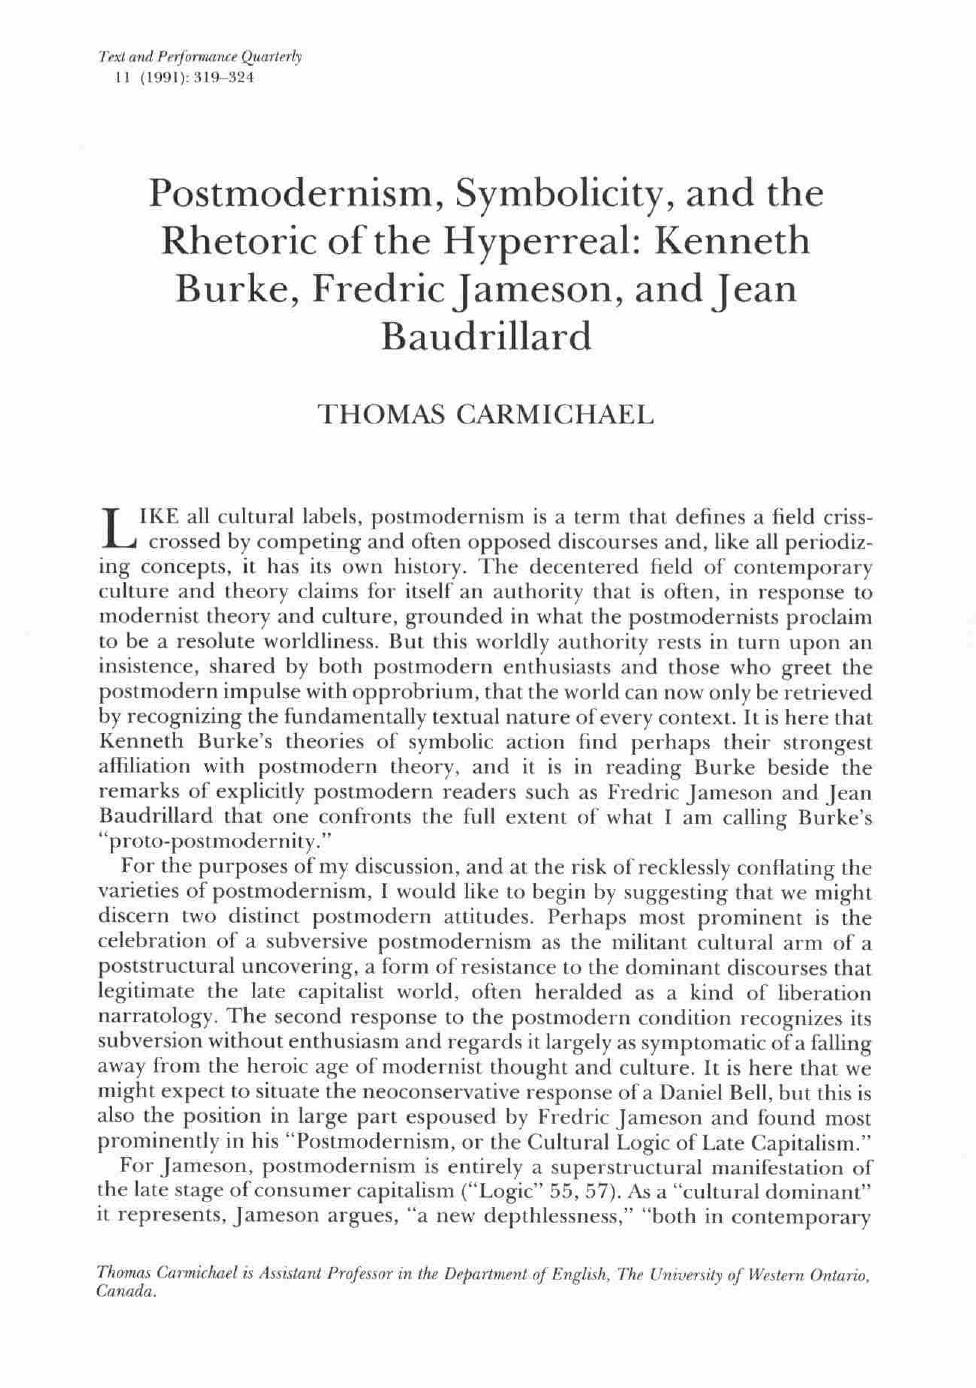 Postmodernism, Symbolicity, and the Rhetoric of the Hyperreal: Kenneth Burke, Fredric Jameson, and Jean Baudrillard - Essay